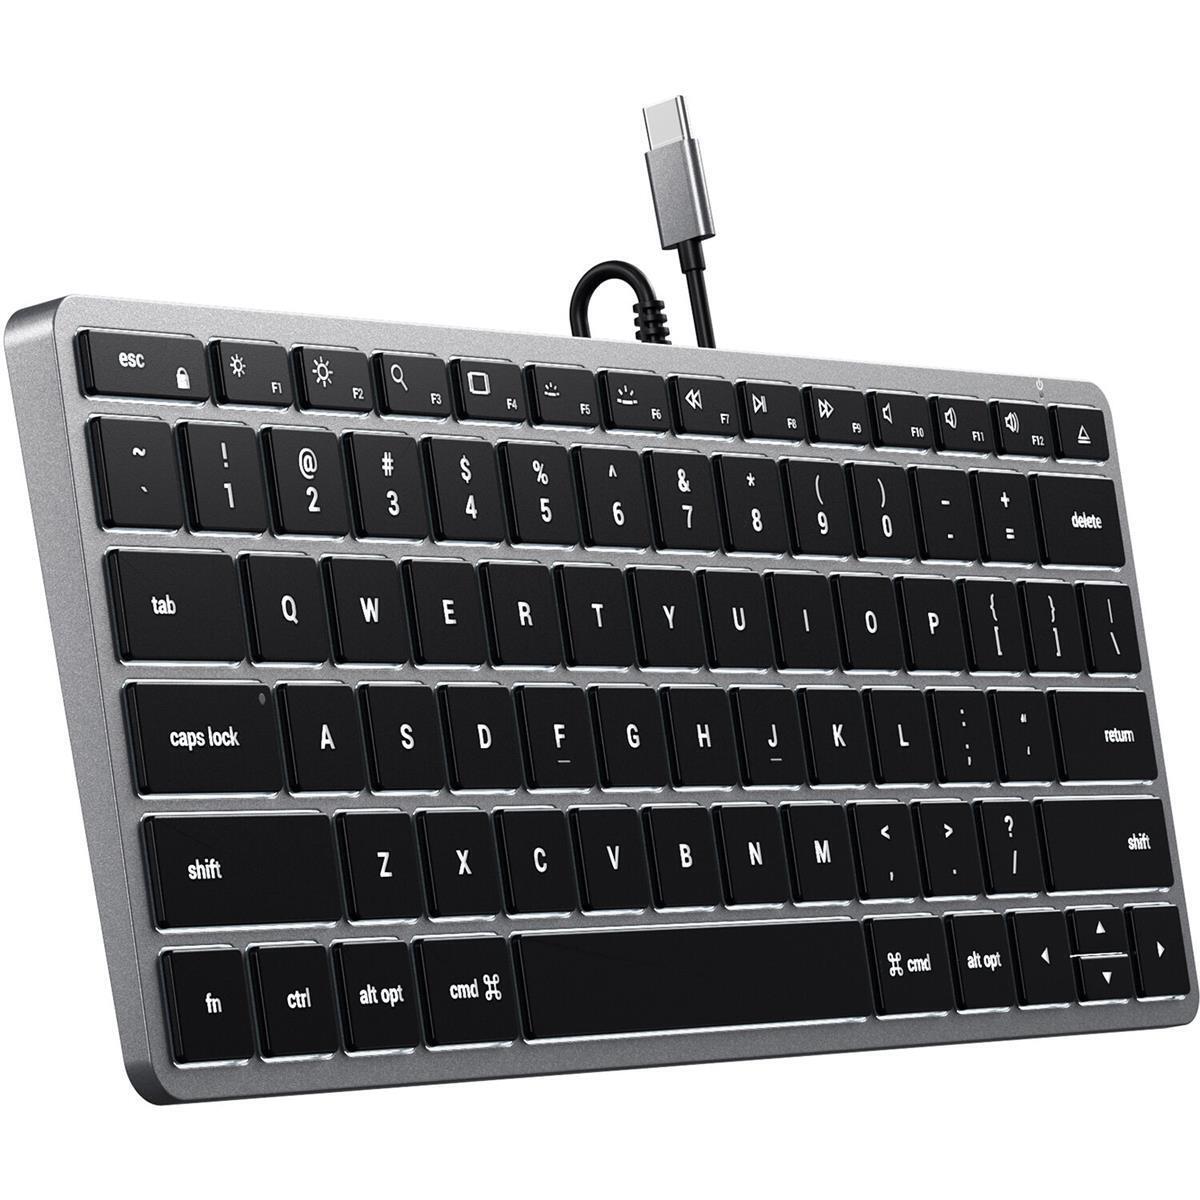 Satechi Slim W1 USB-C Compact Wired Backlit Keyboard #ST-UCSW1M